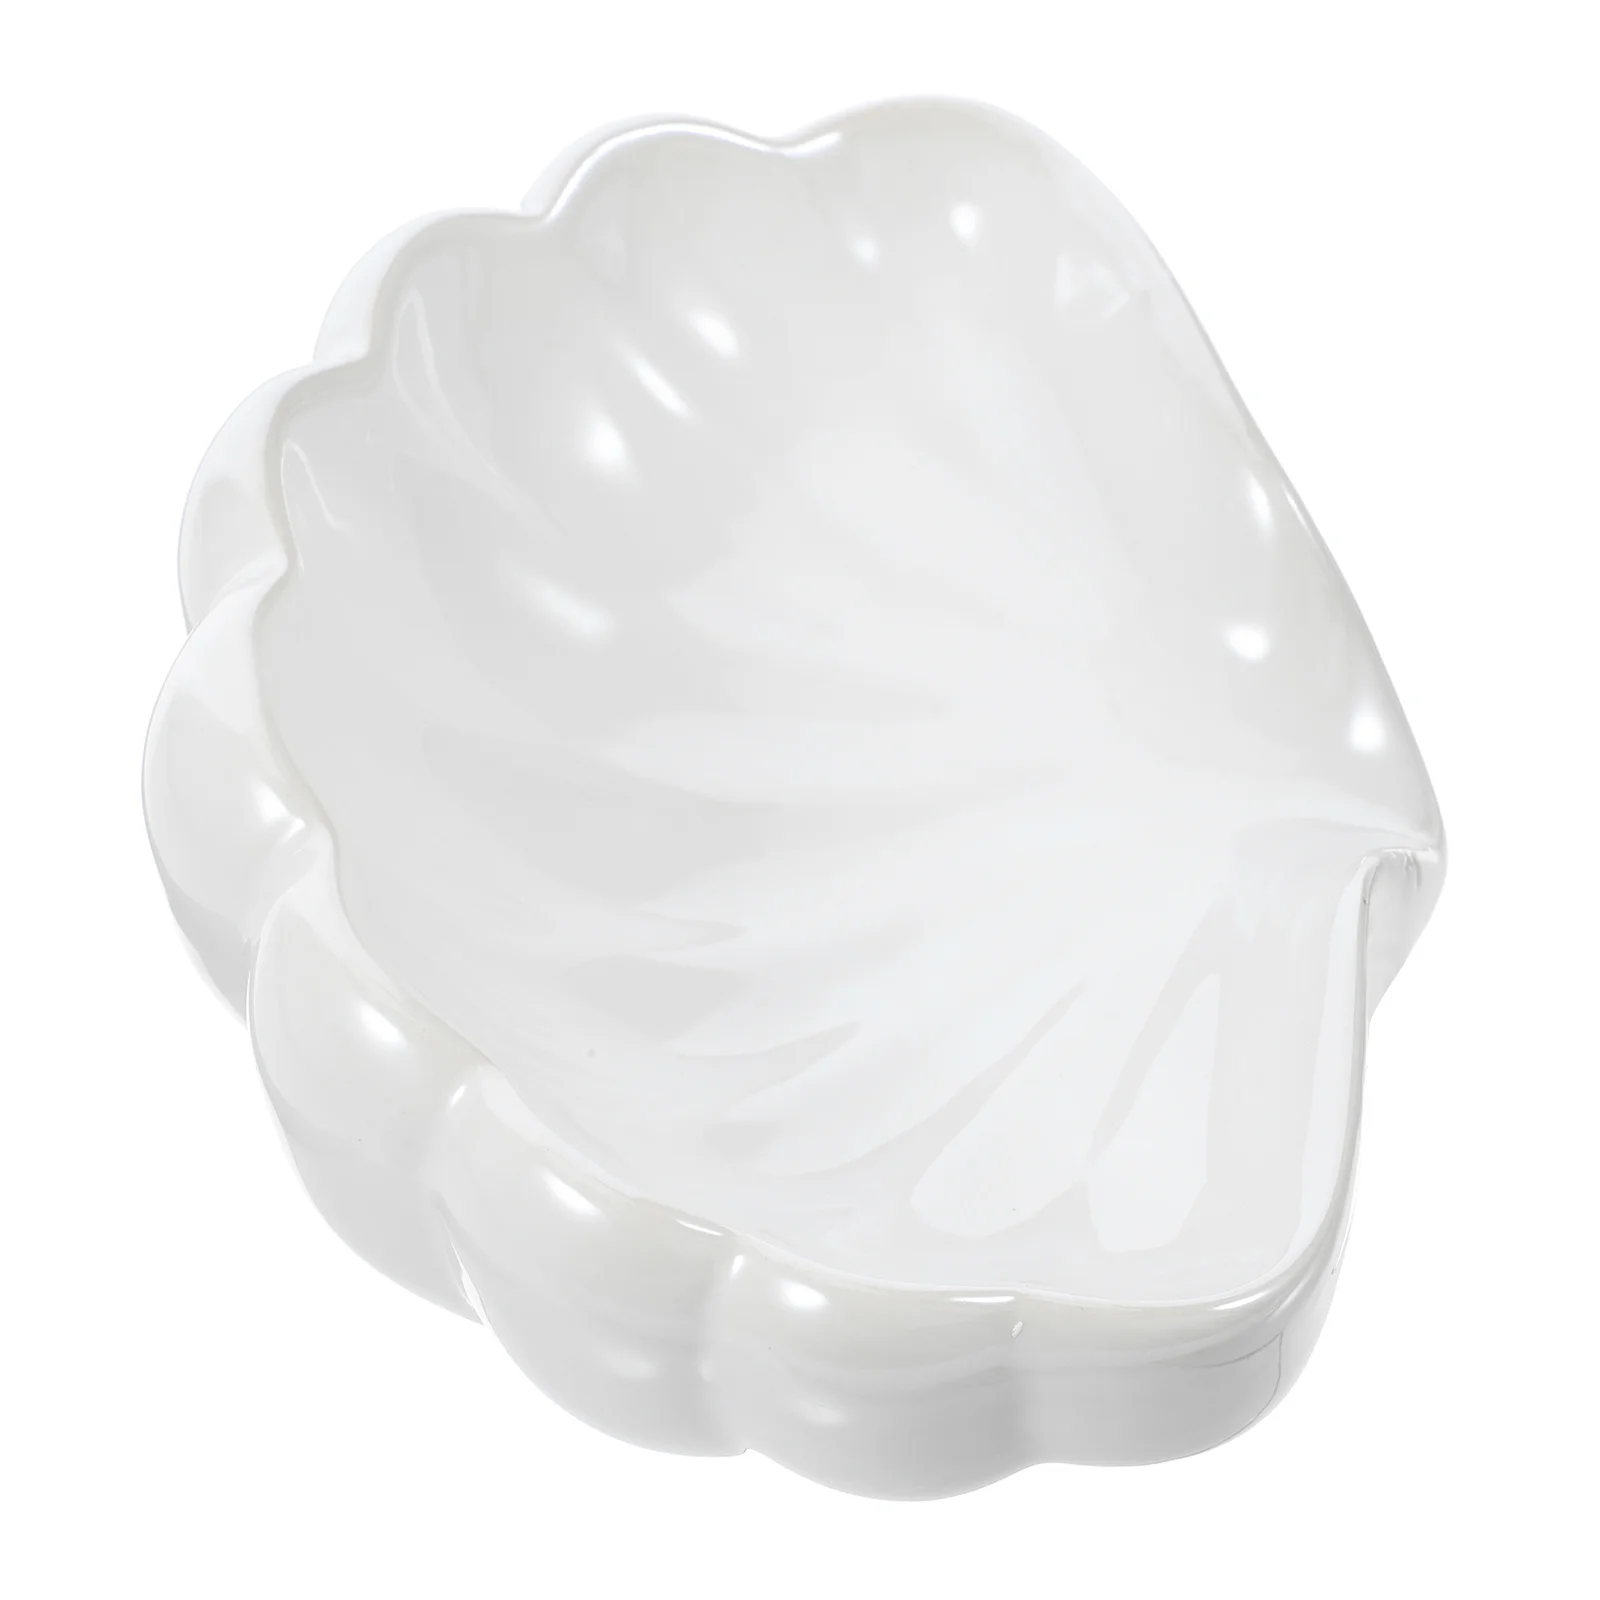 

Shell Soap Dish Holder Decor Self Draining Dishes Small Ceramic No Punching for Bathroom Sink Ceramics Shower